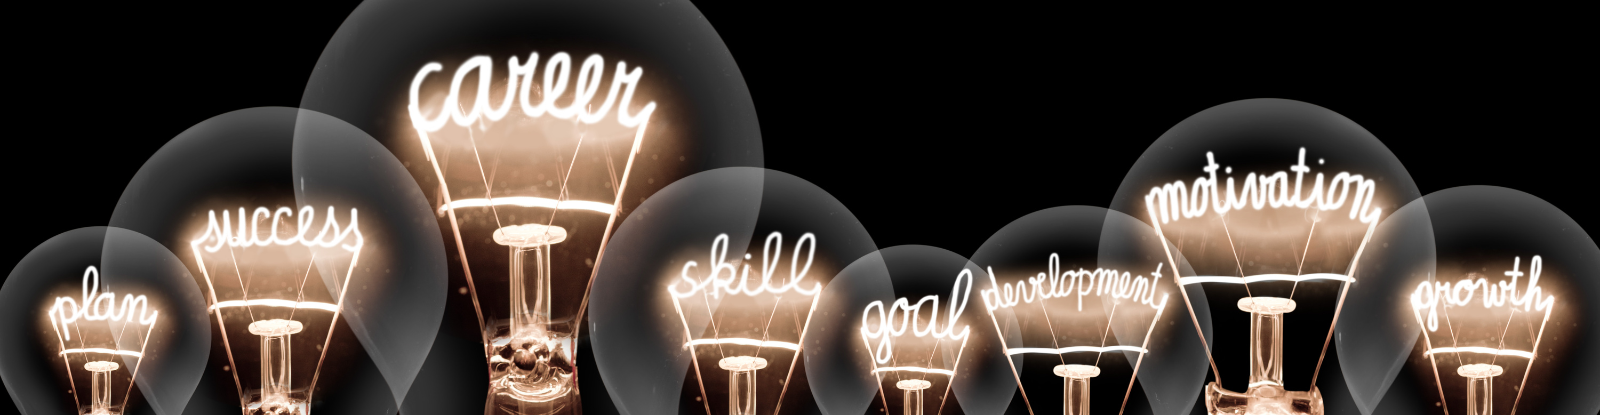 Series of lightbulbs of varying sizes that include the words plan, success, career, skill, goal, development, motivation, and growth.